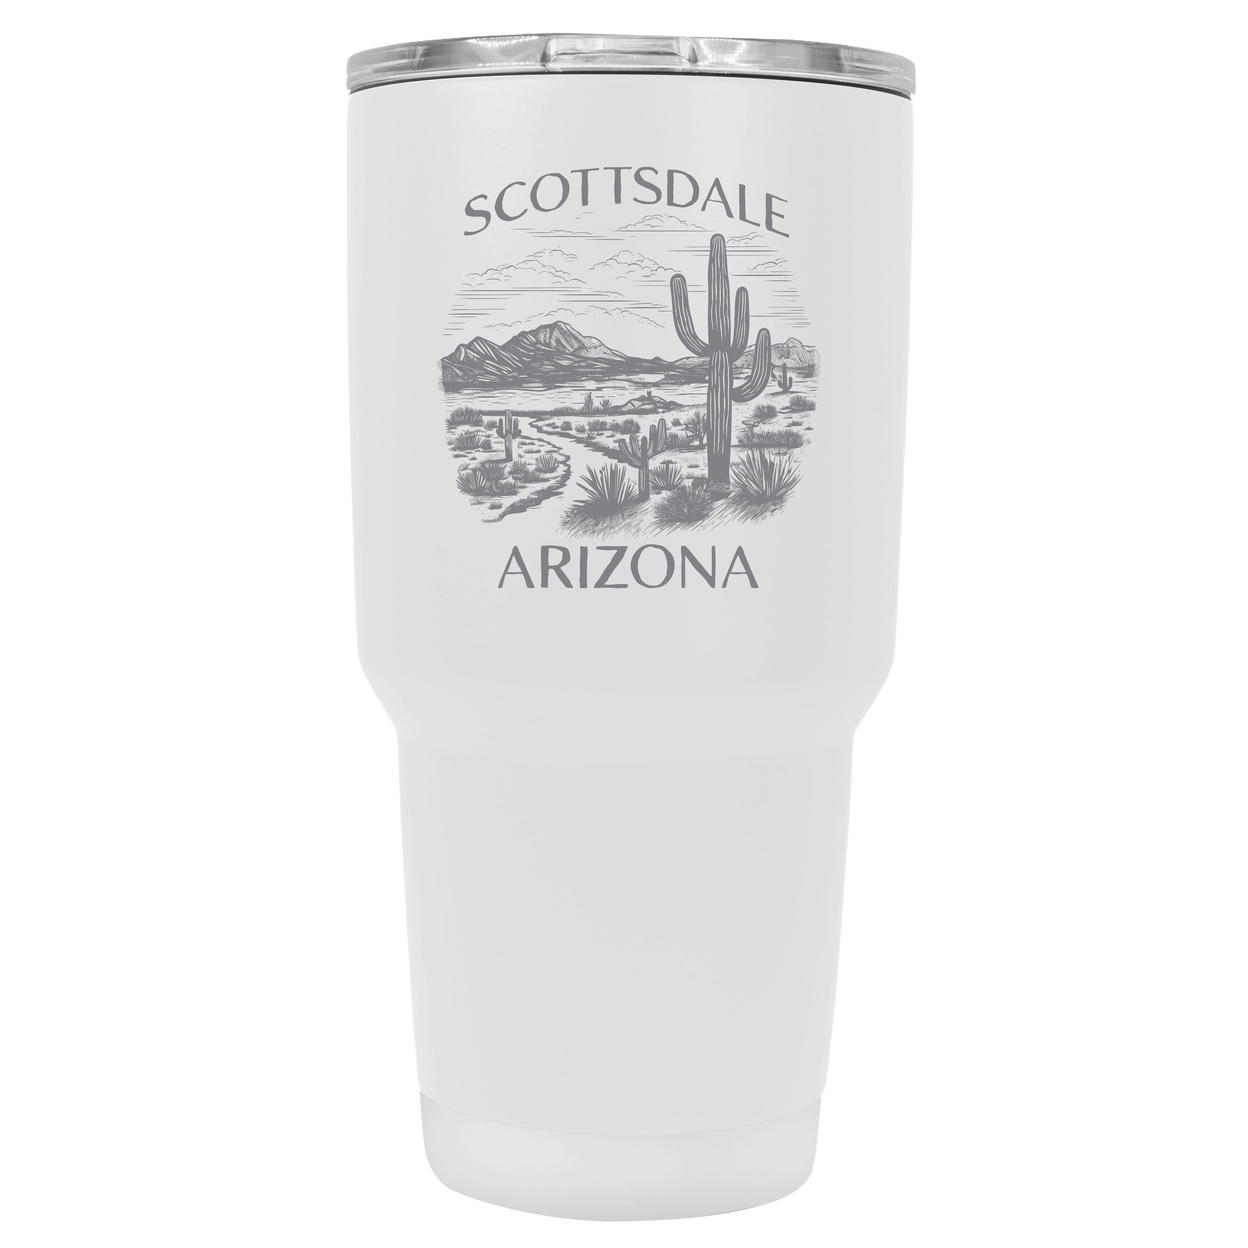 Scottsdale Arizona Souvenir 24 Oz Engraved Insulated Stainless Steel Tumbler - Green,,2-Pack